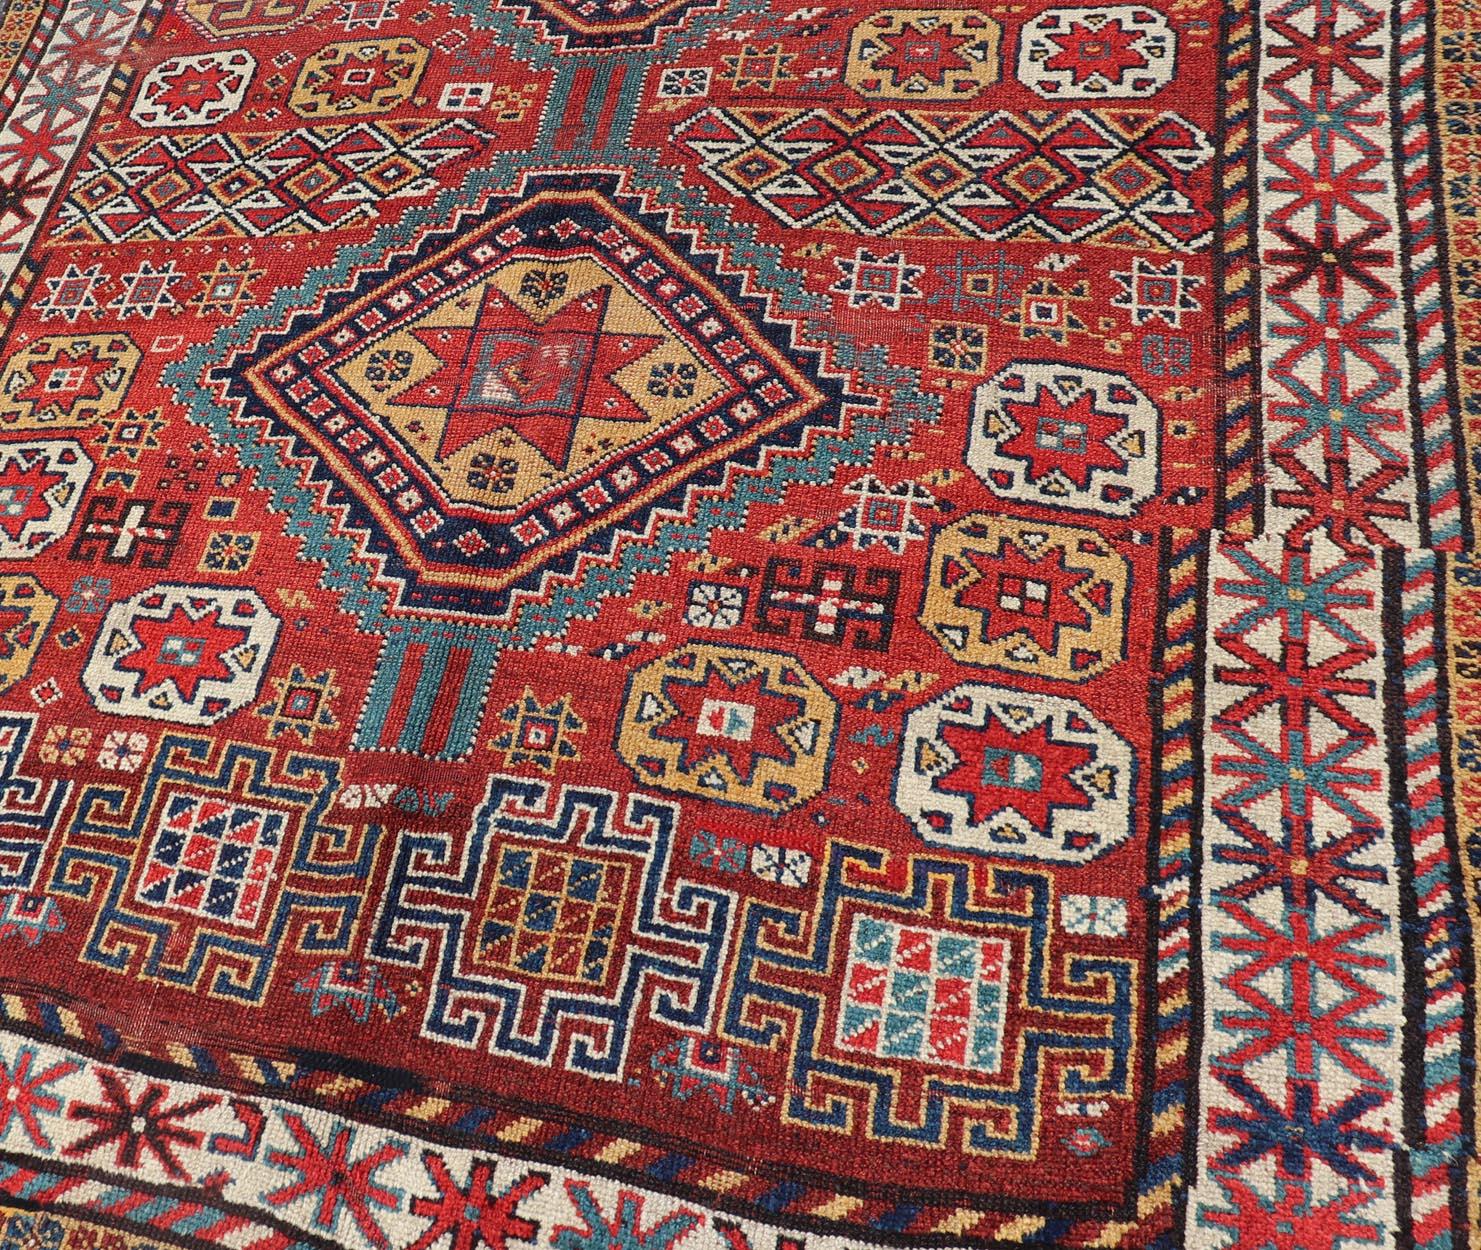 Hand-Knotted Unique Antique Qashqai Rug with Geometric Motifs in Red, Blue, and Golden Yellow For Sale